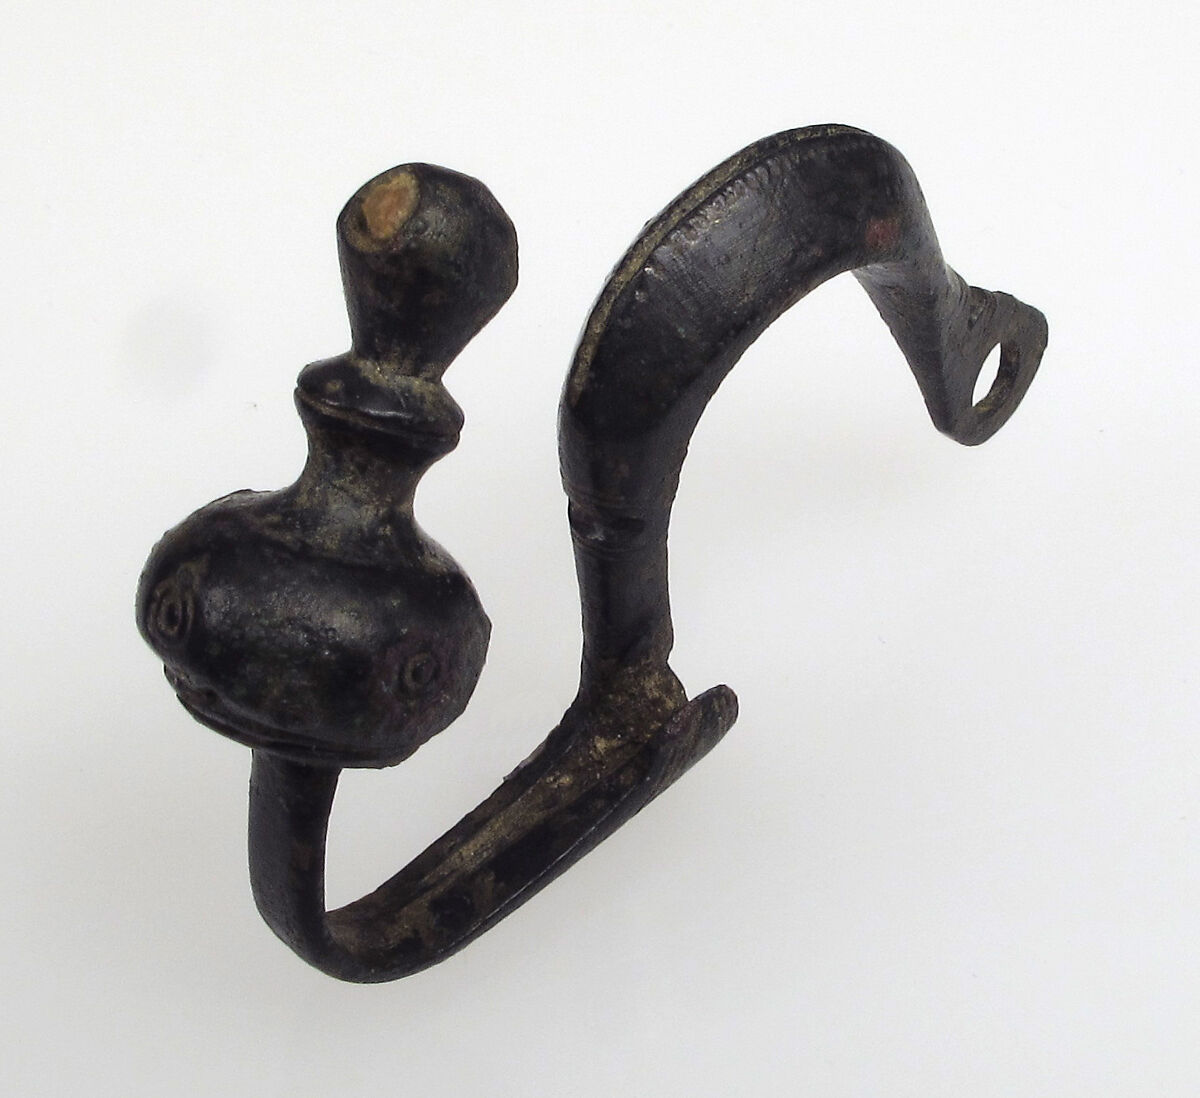 Bow of a Brooch, Copper alloy, Celtic